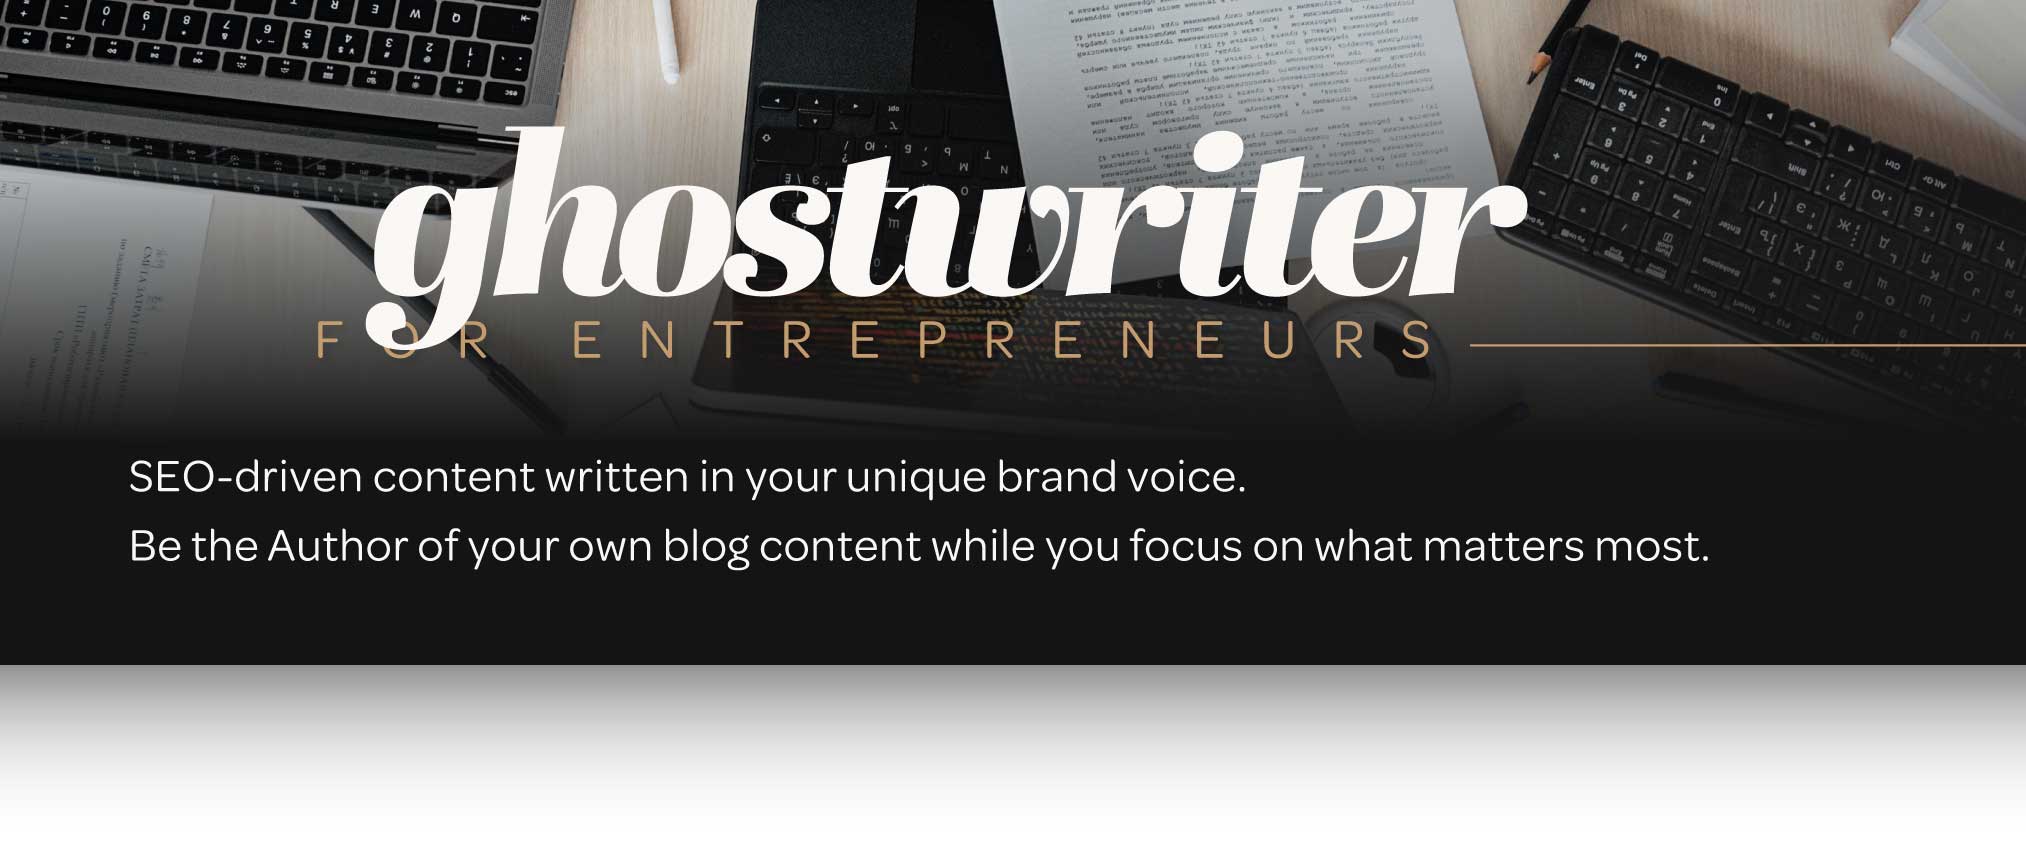 ghostwriter for entrepreneurs business owners ghostwriting copywriting blog writing article writing